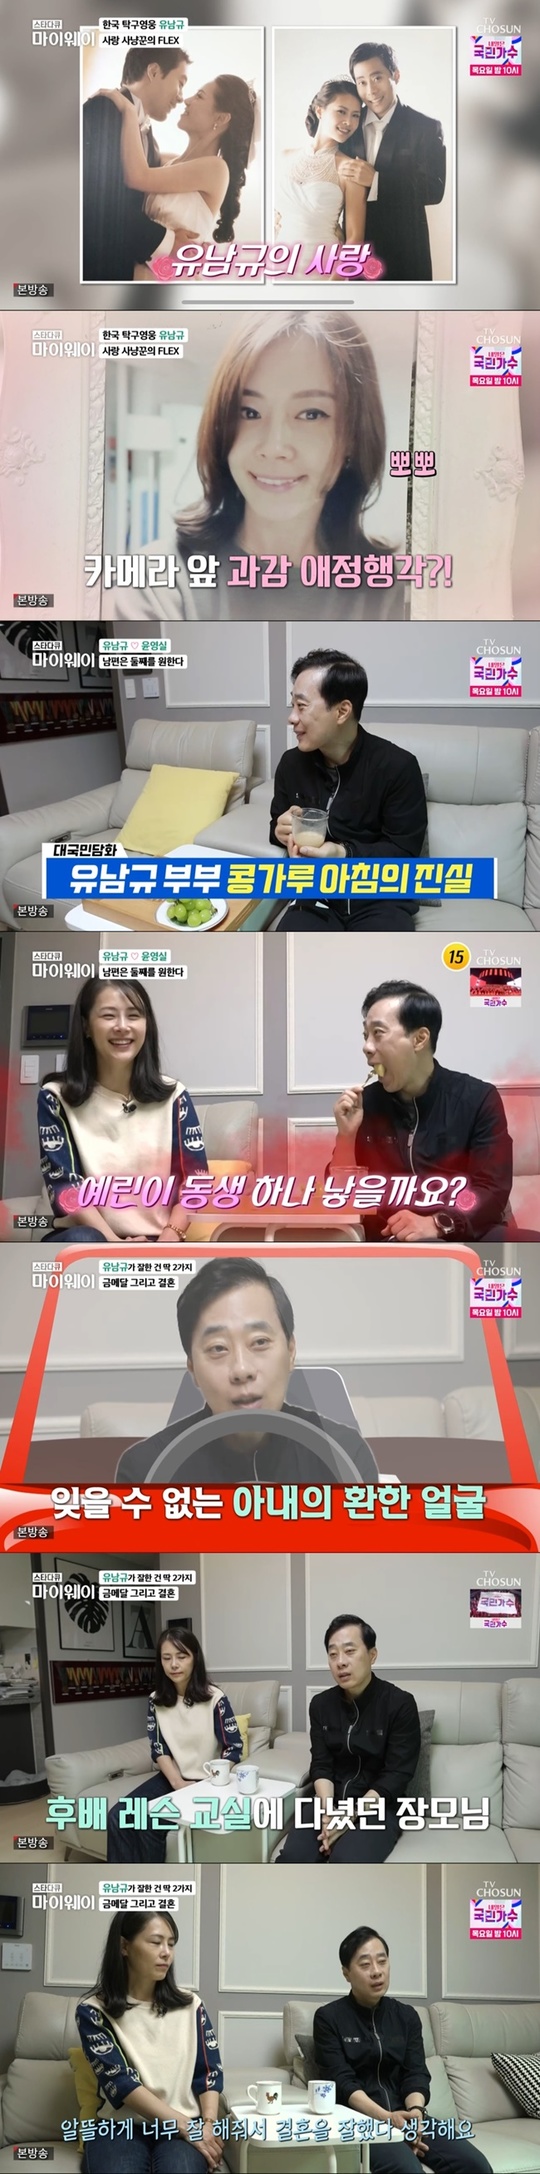 Former Table Tennis 3D player Yoo Nam-gyu has revealed his first meeting with his wife since his second year plan.On November 7, TV Chosun star documentary myway, Yoo Nam-gyus life was drawn.My parents send me to work hard, so I eat it every morning. I eat it lighter than rice in the morning. I eat lunch well and dinner lightly, said Yu Nam-gyu.When the production team asked, Does your wife take care of you every day like this? Yu Nam-gyu hesitated and laughed, Yes, almost what. My wife laughed, Its always a (confectionery) option and this is a (fruit) option.I do not eat well. I would like to eat well if I do, but my mouth is shorter than me.I had a lot of lunch, but I was so full that I was tested, said Yoo Nam-gyu, who heard the news.When I wondered about the morning scenery of the couple, Yu Nam-gyu said, I am so busy with each other.I think shell let her brother go, he said, laughing after the plan for the second generation. Shes lonely, but she has a child (Pet).I feel like my own daughter, I have a conversation, she said.I was so busy as a player that I wanted to get married late at home, said Yoo Nam-gyu, who was now 32 years old and was starting to think about retiring and marrying.Then, when I coached the national team, I turned 39, and I felt strongly that I wanted to marry everyone when I saw them starting a family.My junior introduced me to Table Tennis 3D lessons and my mother-in-law asked me to meet her daughter. I saw (my wife) at the intersection of Gangnam Station, and the color of my clothes. The first impression was always a smile.I thought I could leave everything to myself when I talked to her, and I thought she was so nice to me because she was so nice to me because I had a little money concept.I told you that my seniors did only two good things to me, but I married Gold medal. 